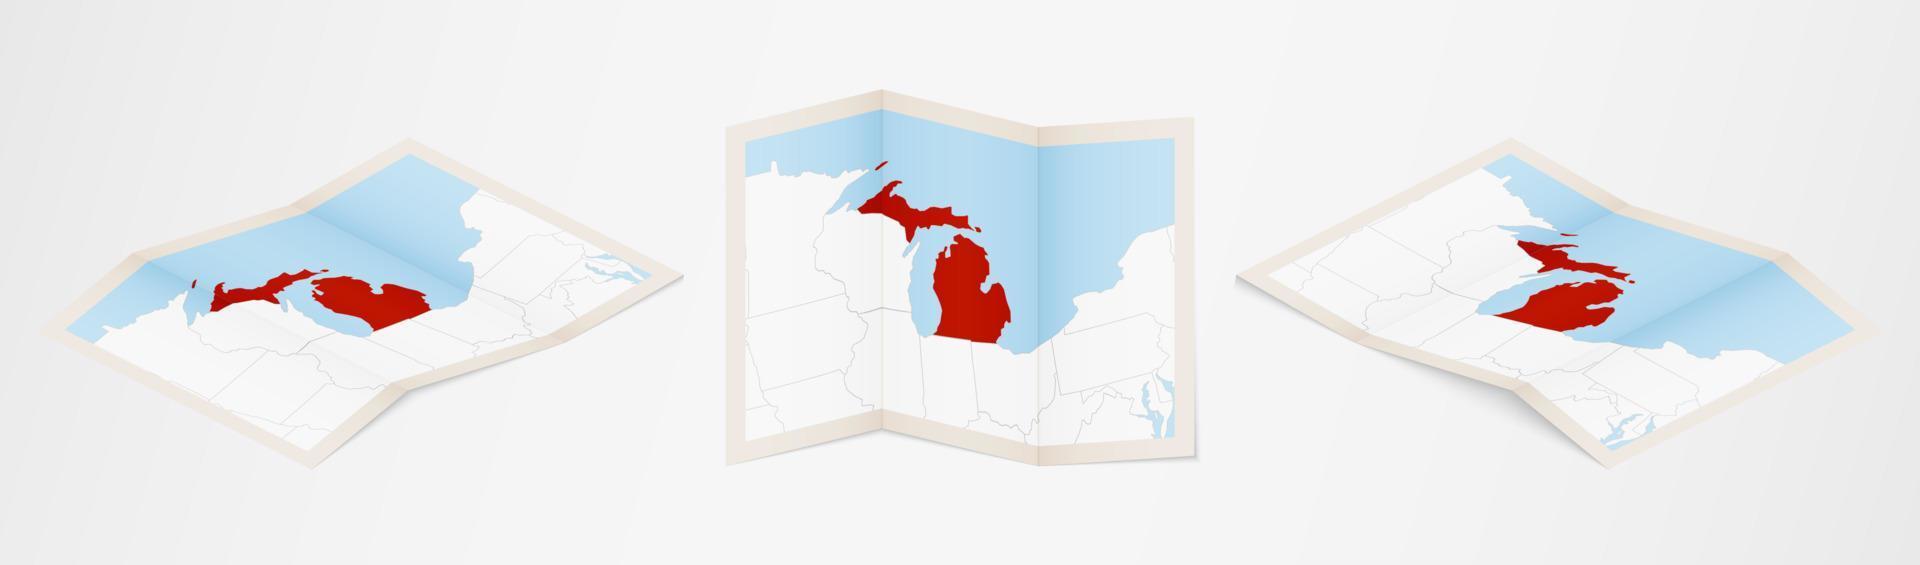 Folded map of Michigan in three different versions. vector